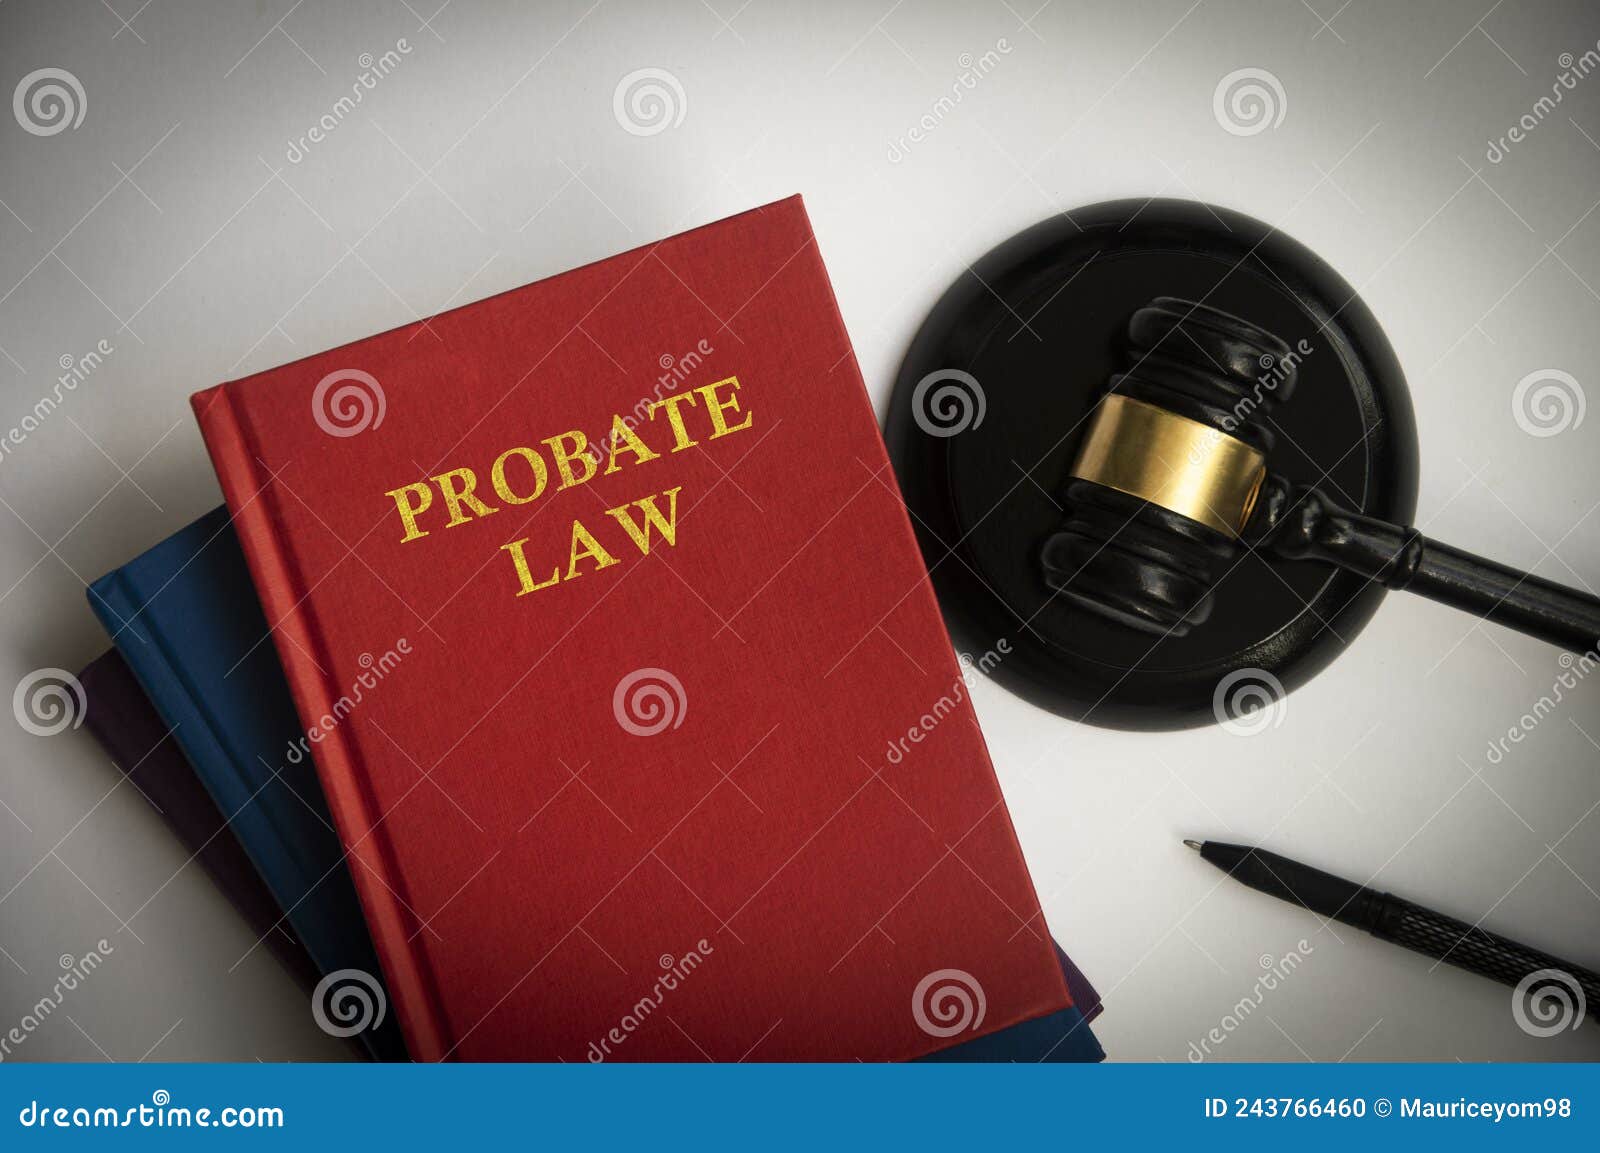 top view of probate law book with gavel on white background.